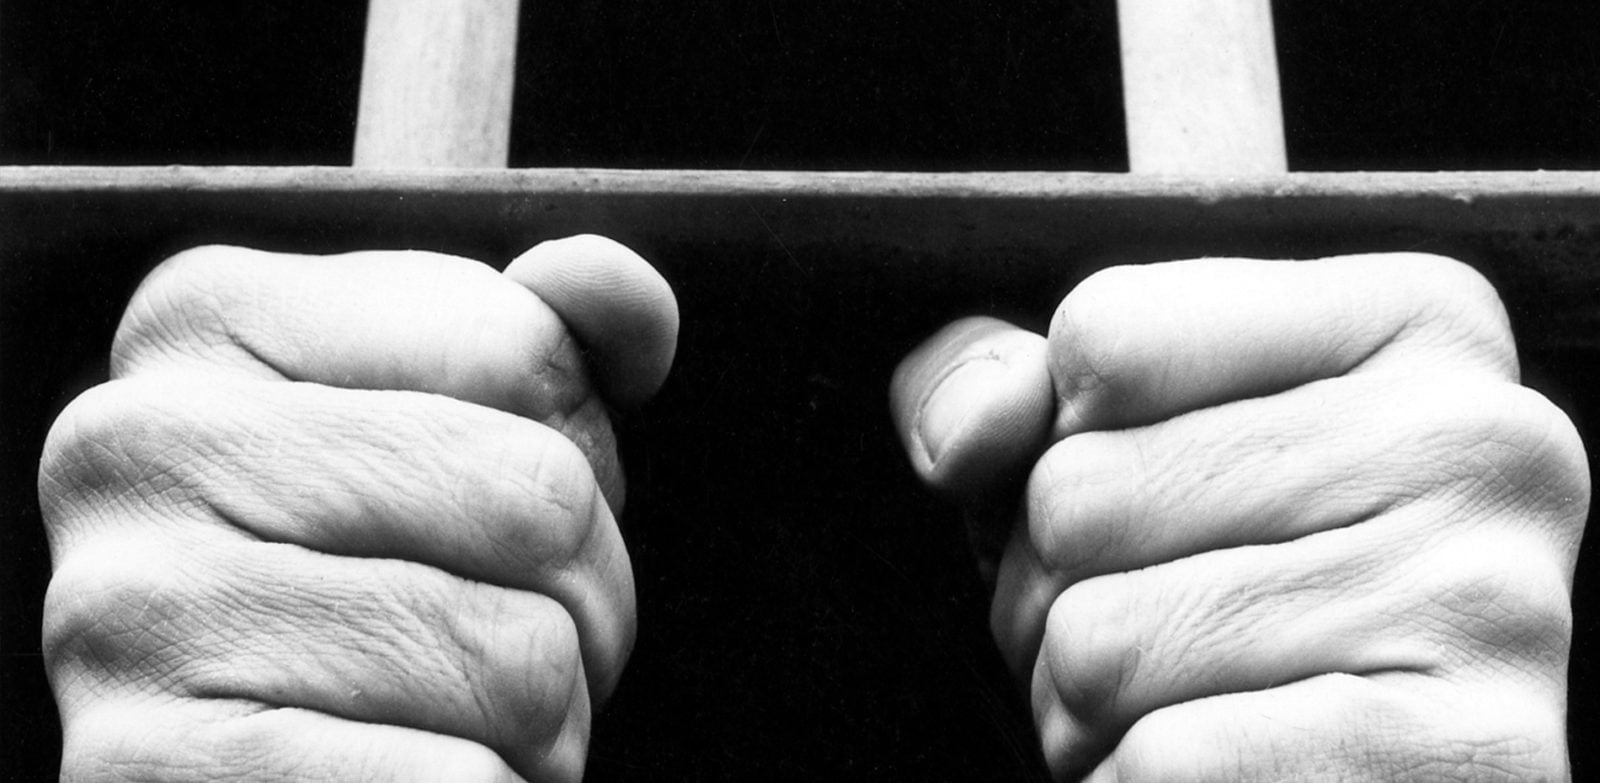 Black and white photograph showing hands of an anonymous prisoner gripping the bars of a prison cell.